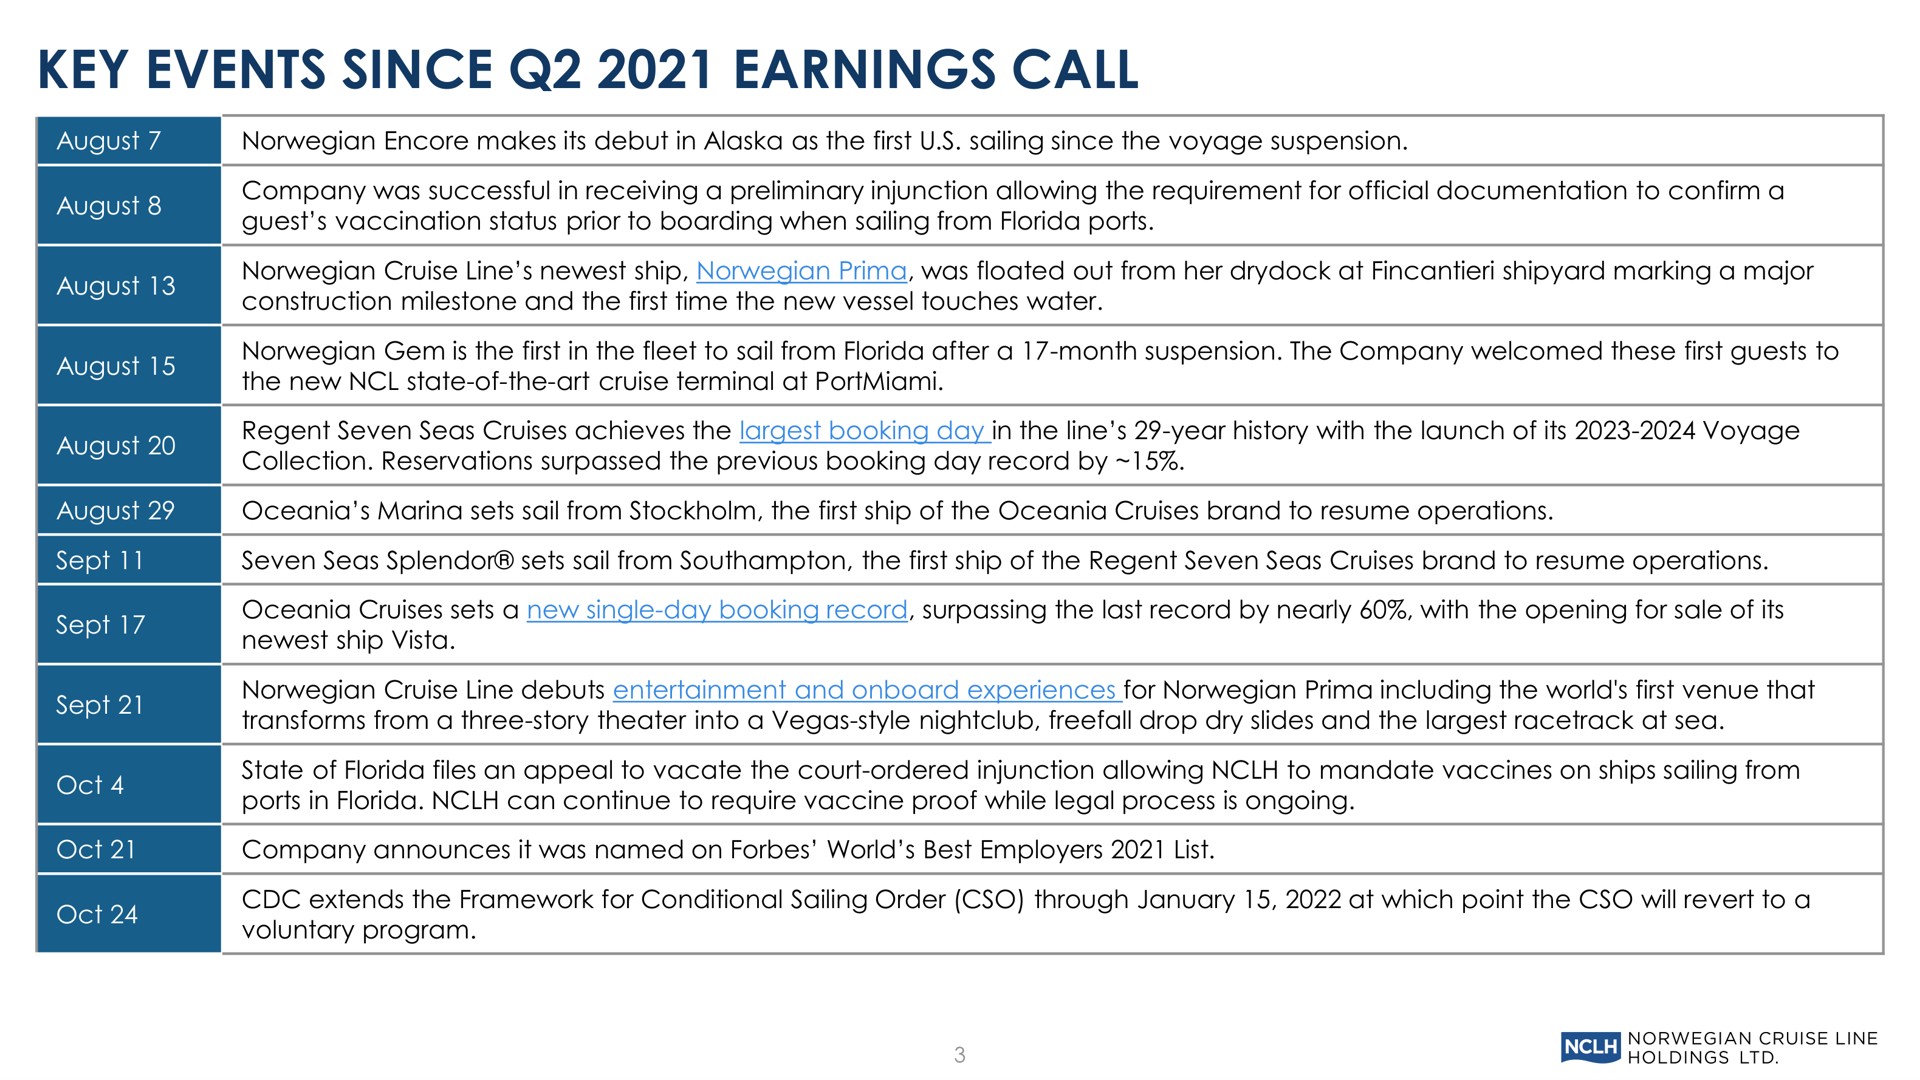 key events since earnings call | Norwegian Cruise Line